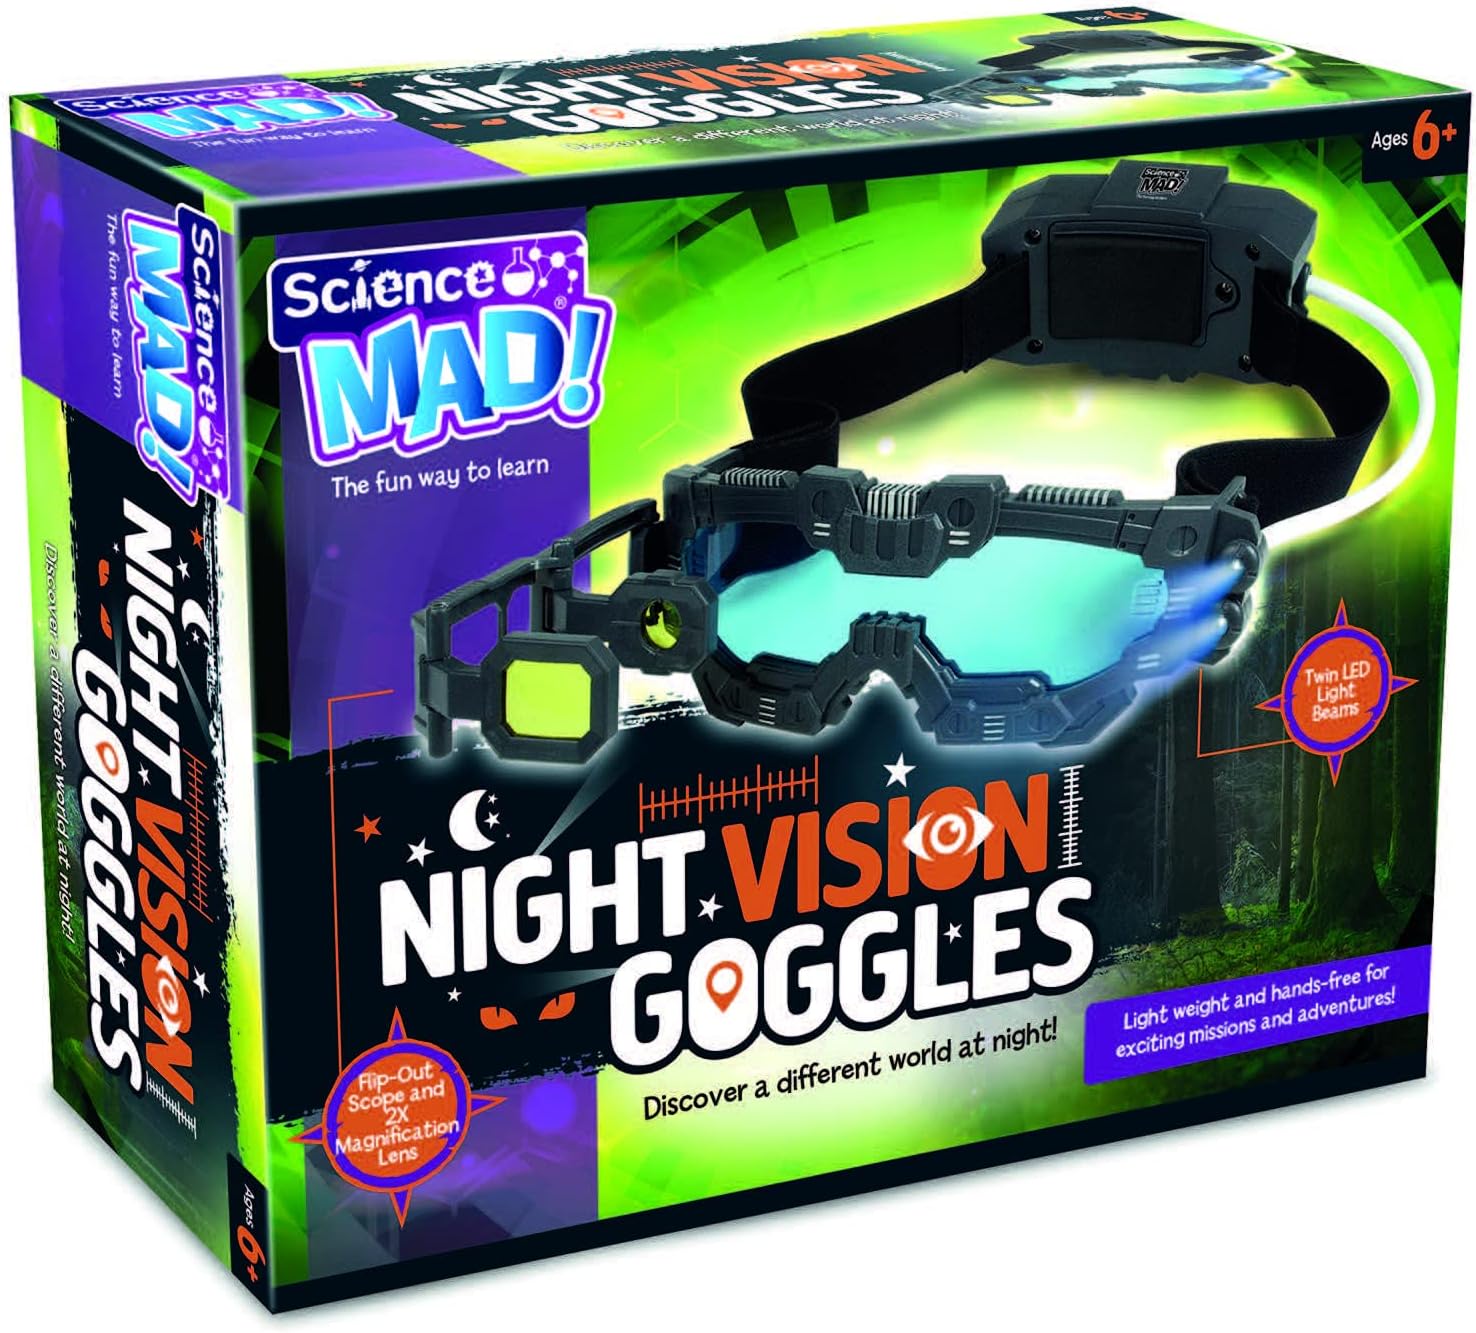 Science MAD! Night Vision Goggles For Kids - For Fun Night Missions - Lightweight, Flip Out Scope, 2x Magnification, Twin LED Beams, Blue Lenses, 6+ Years, ‎20 x 10 x 5.5 cm (SM55) , Black